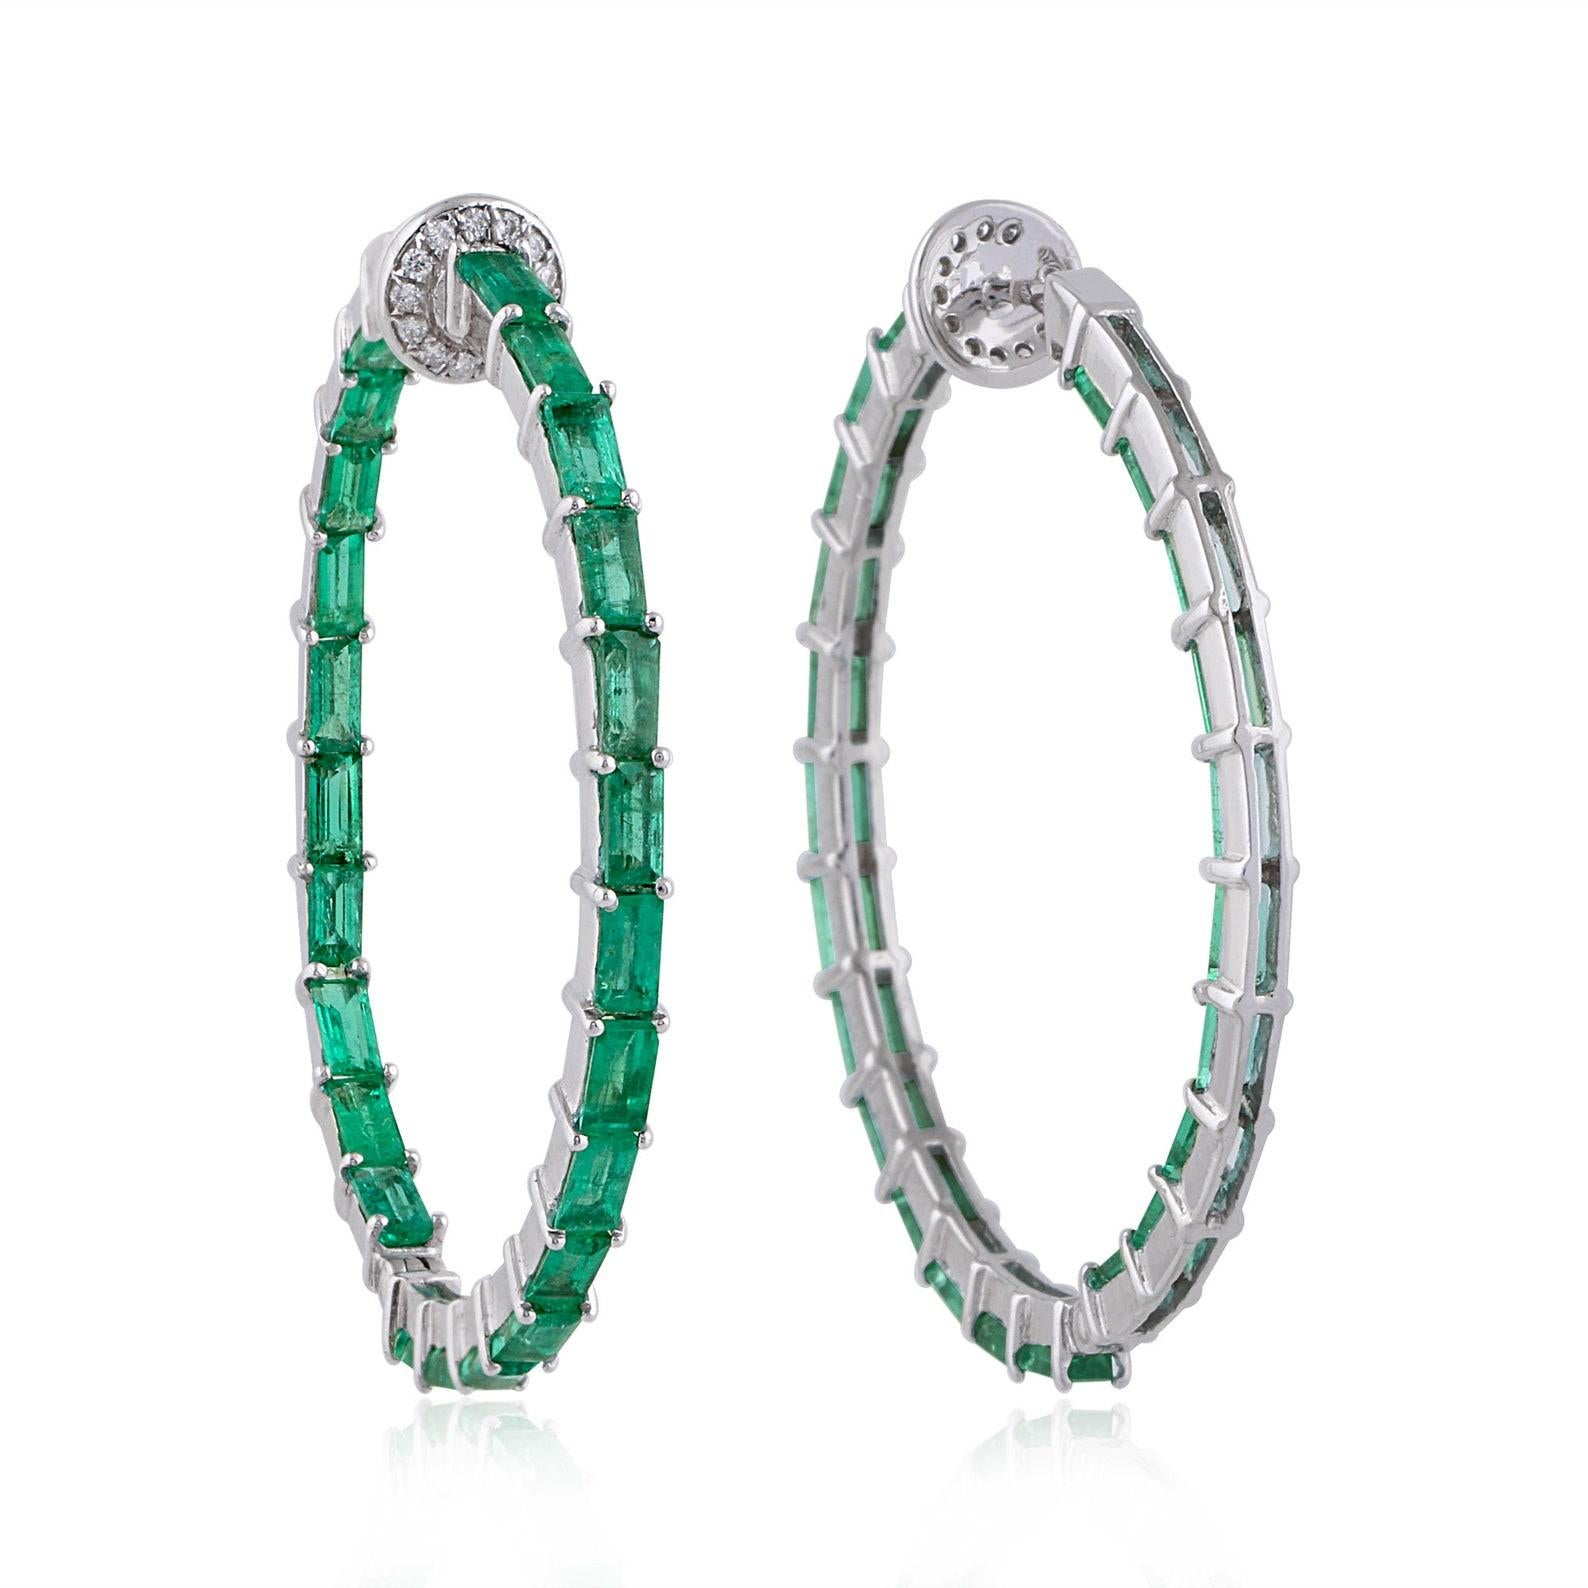 Cast in 14-karat gold, these beautiful inside out hoop earrings are hand set with 5.33 carats of baguette emerald and .12 carats of sparkling diamonds. 

FOLLOW  MEGHNA JEWELS storefront to view the latest collection & exclusive pieces.  Meghna